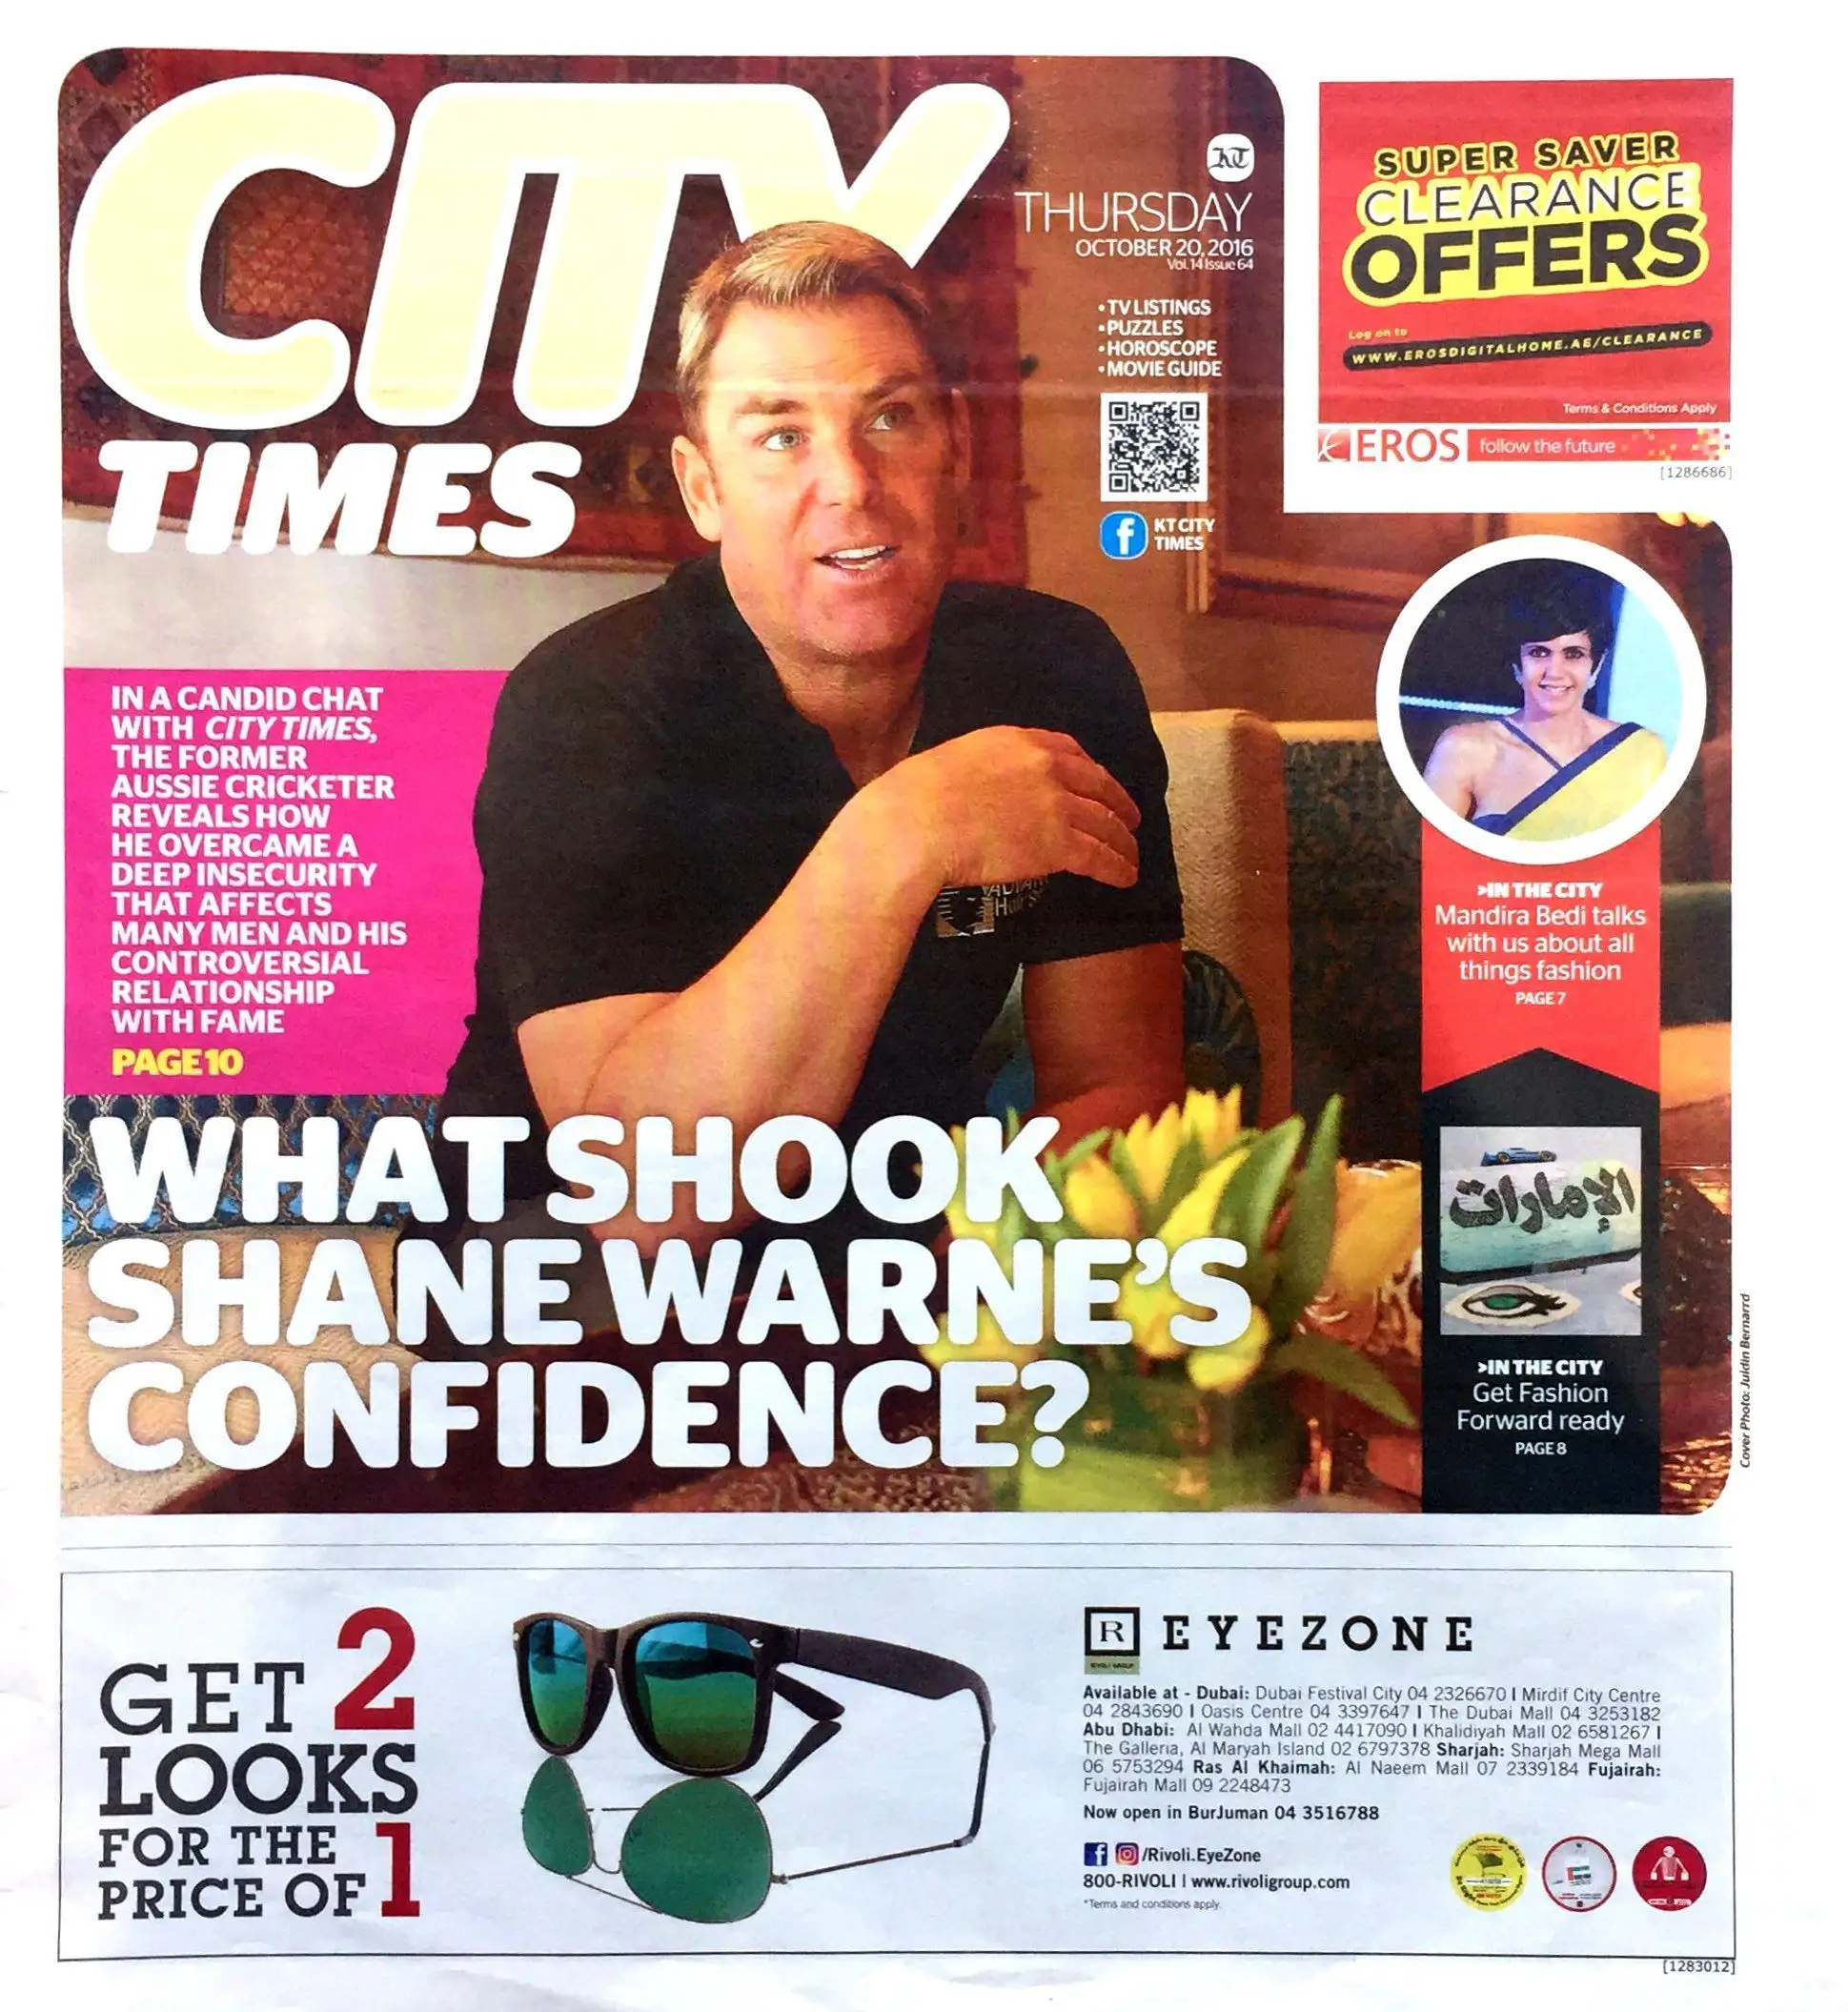 20 Oct 2016 City Times on Hair loss solutions